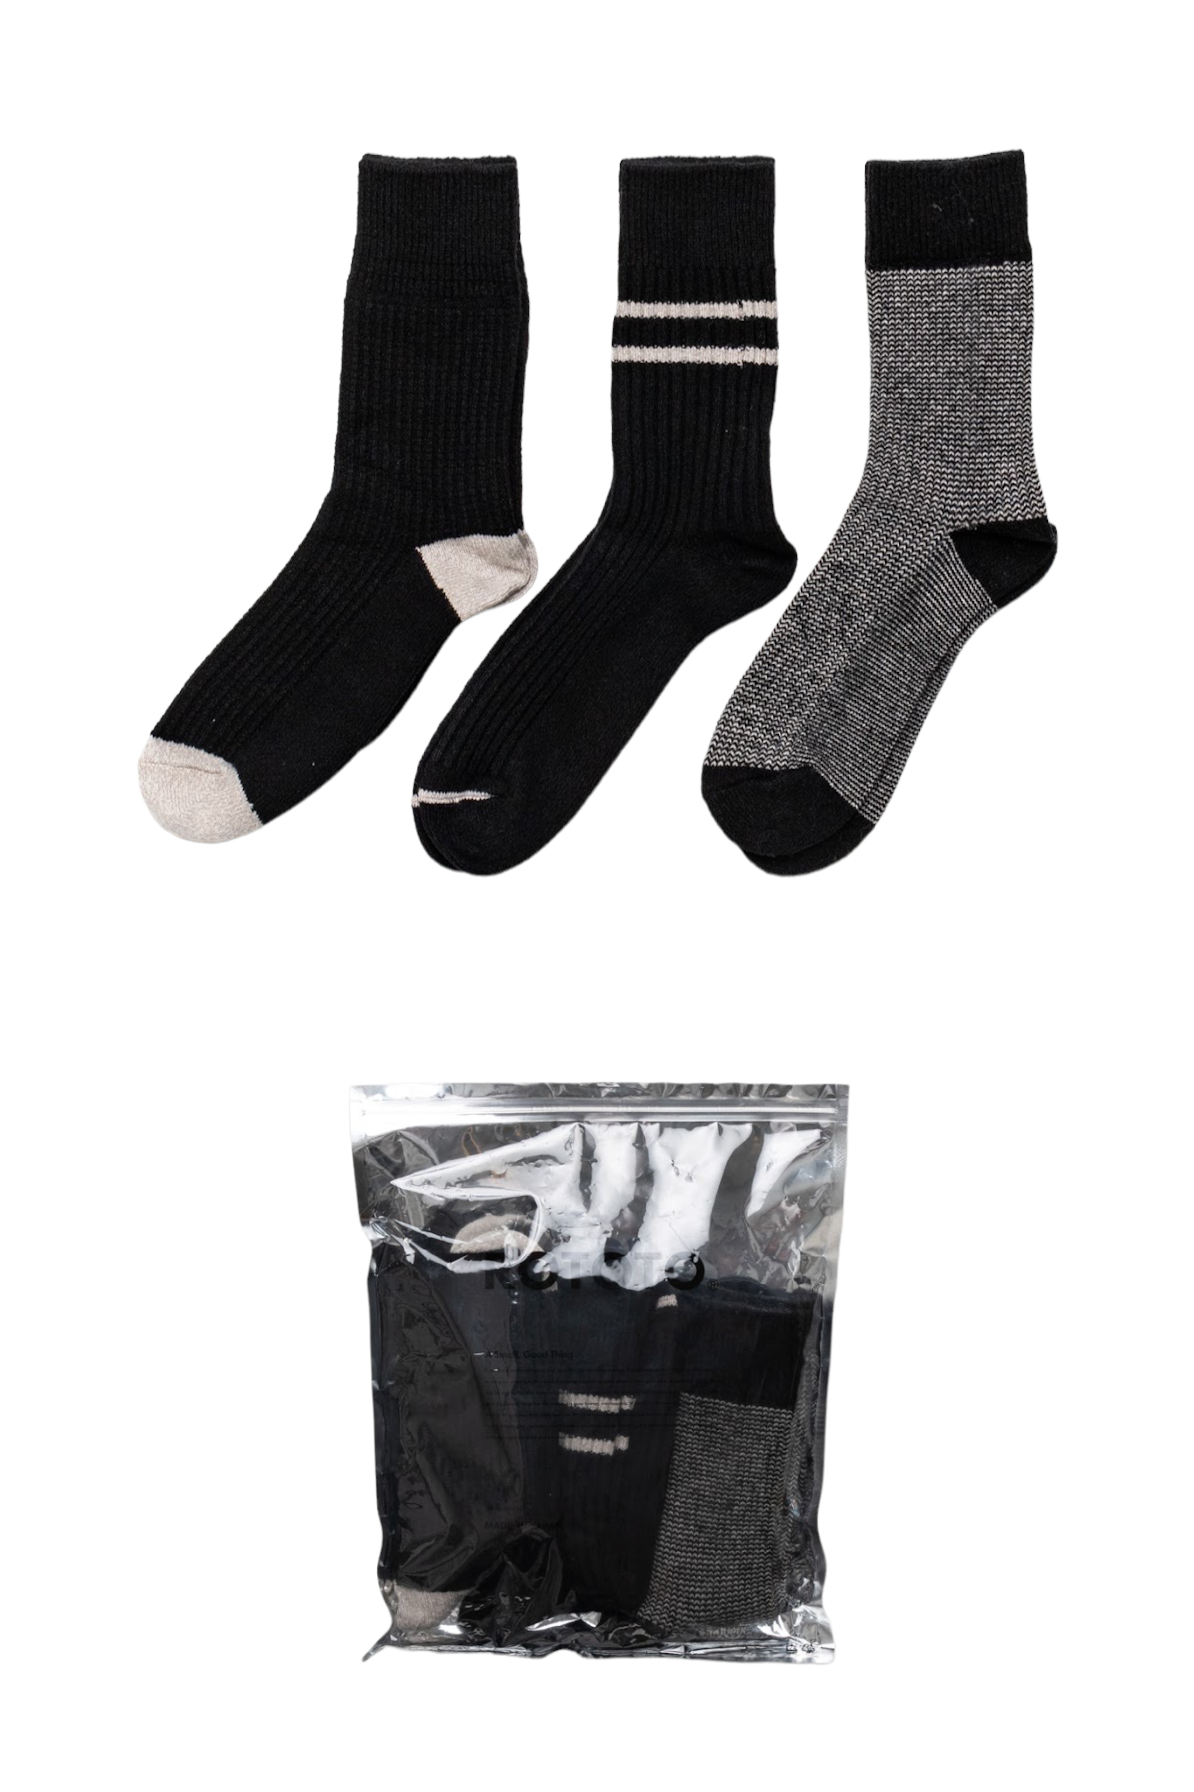 Recycle Cotton/Wool Daily 3 Pack Socks